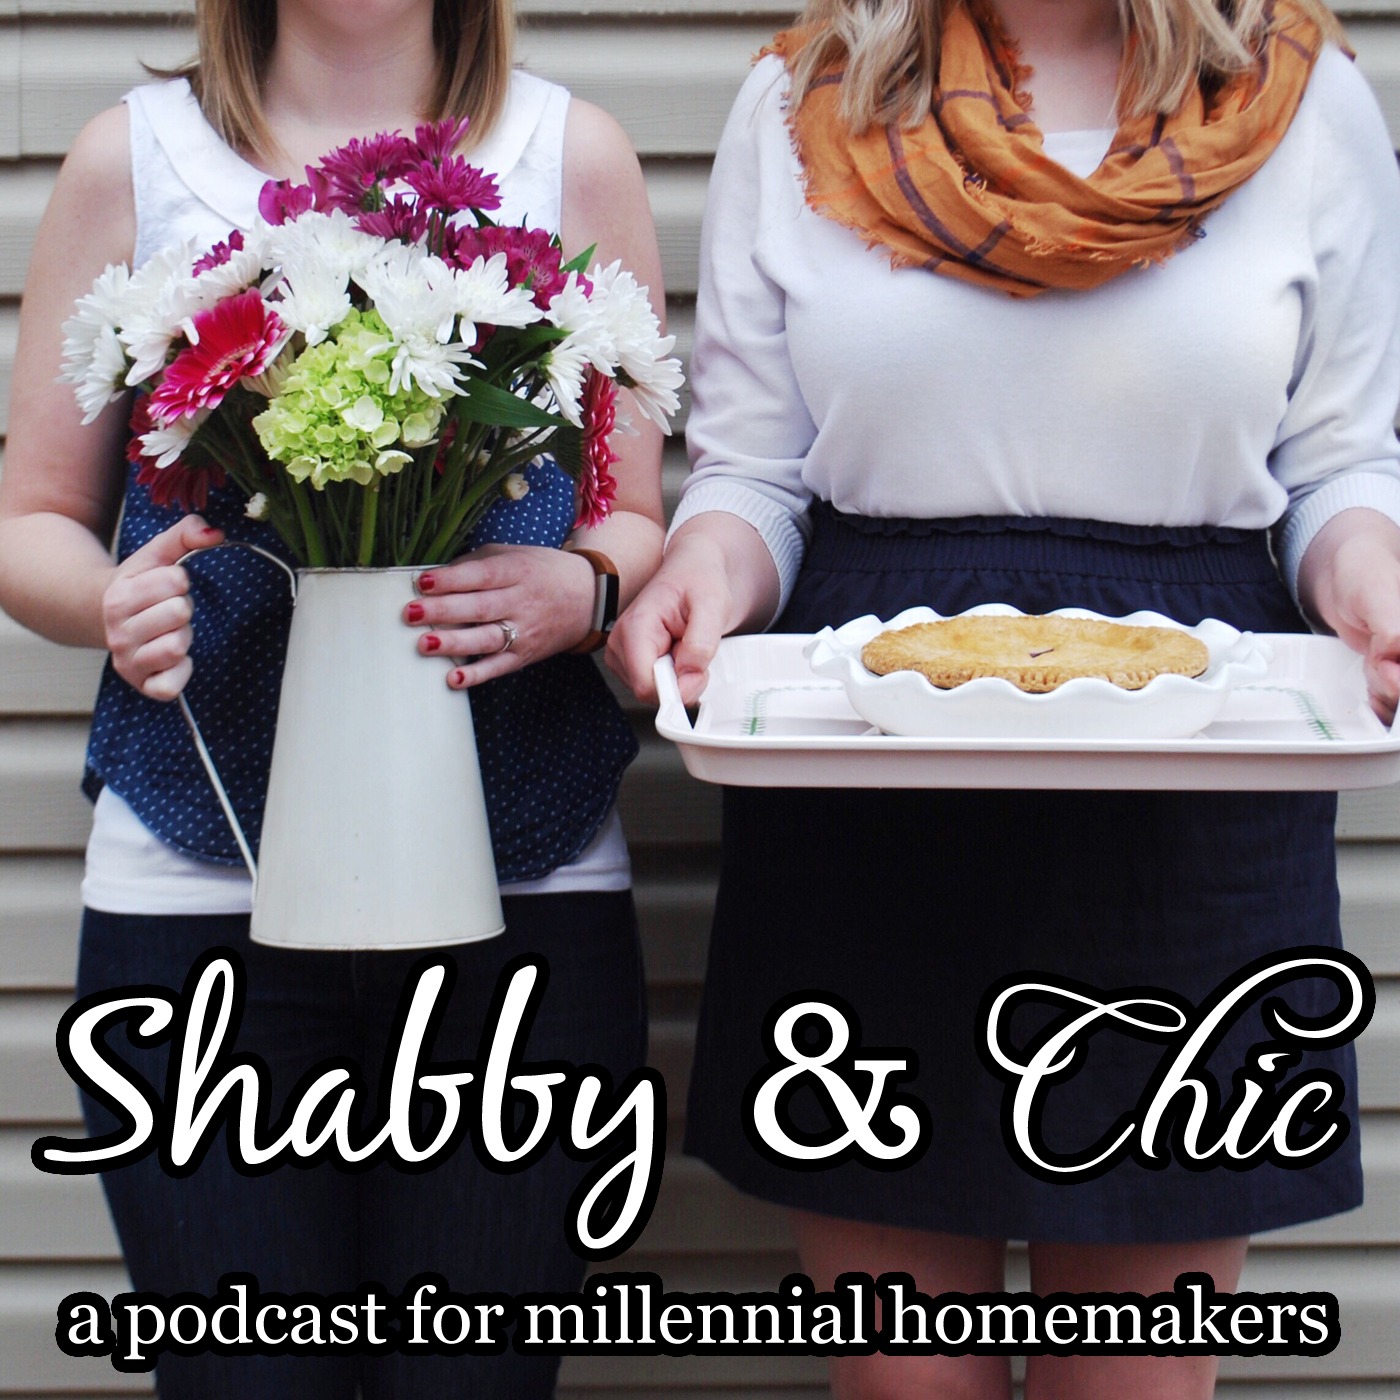 Welcome to Shabby & Chic